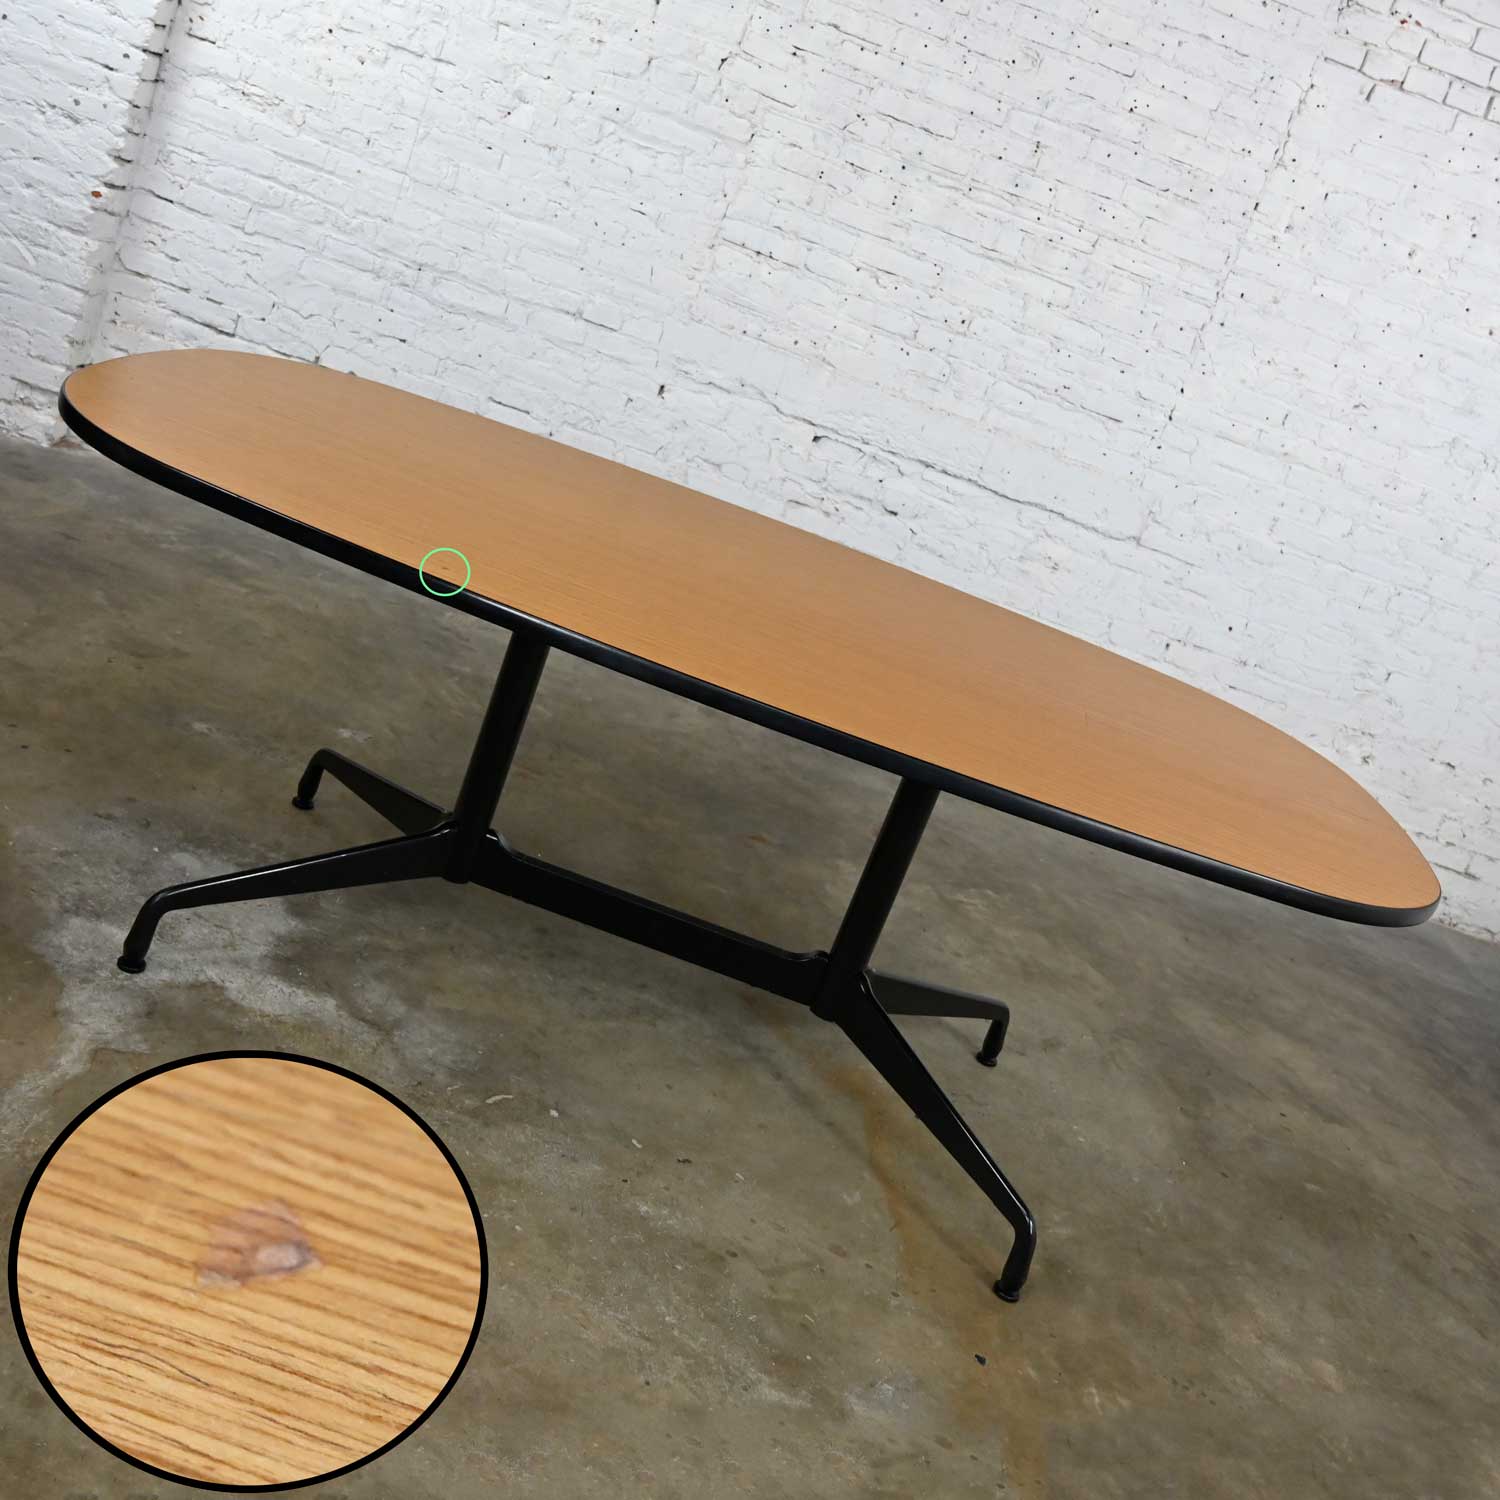 Eames Herman Miller Racetrack Oval Conference or Dining Table Universal Segmented Base